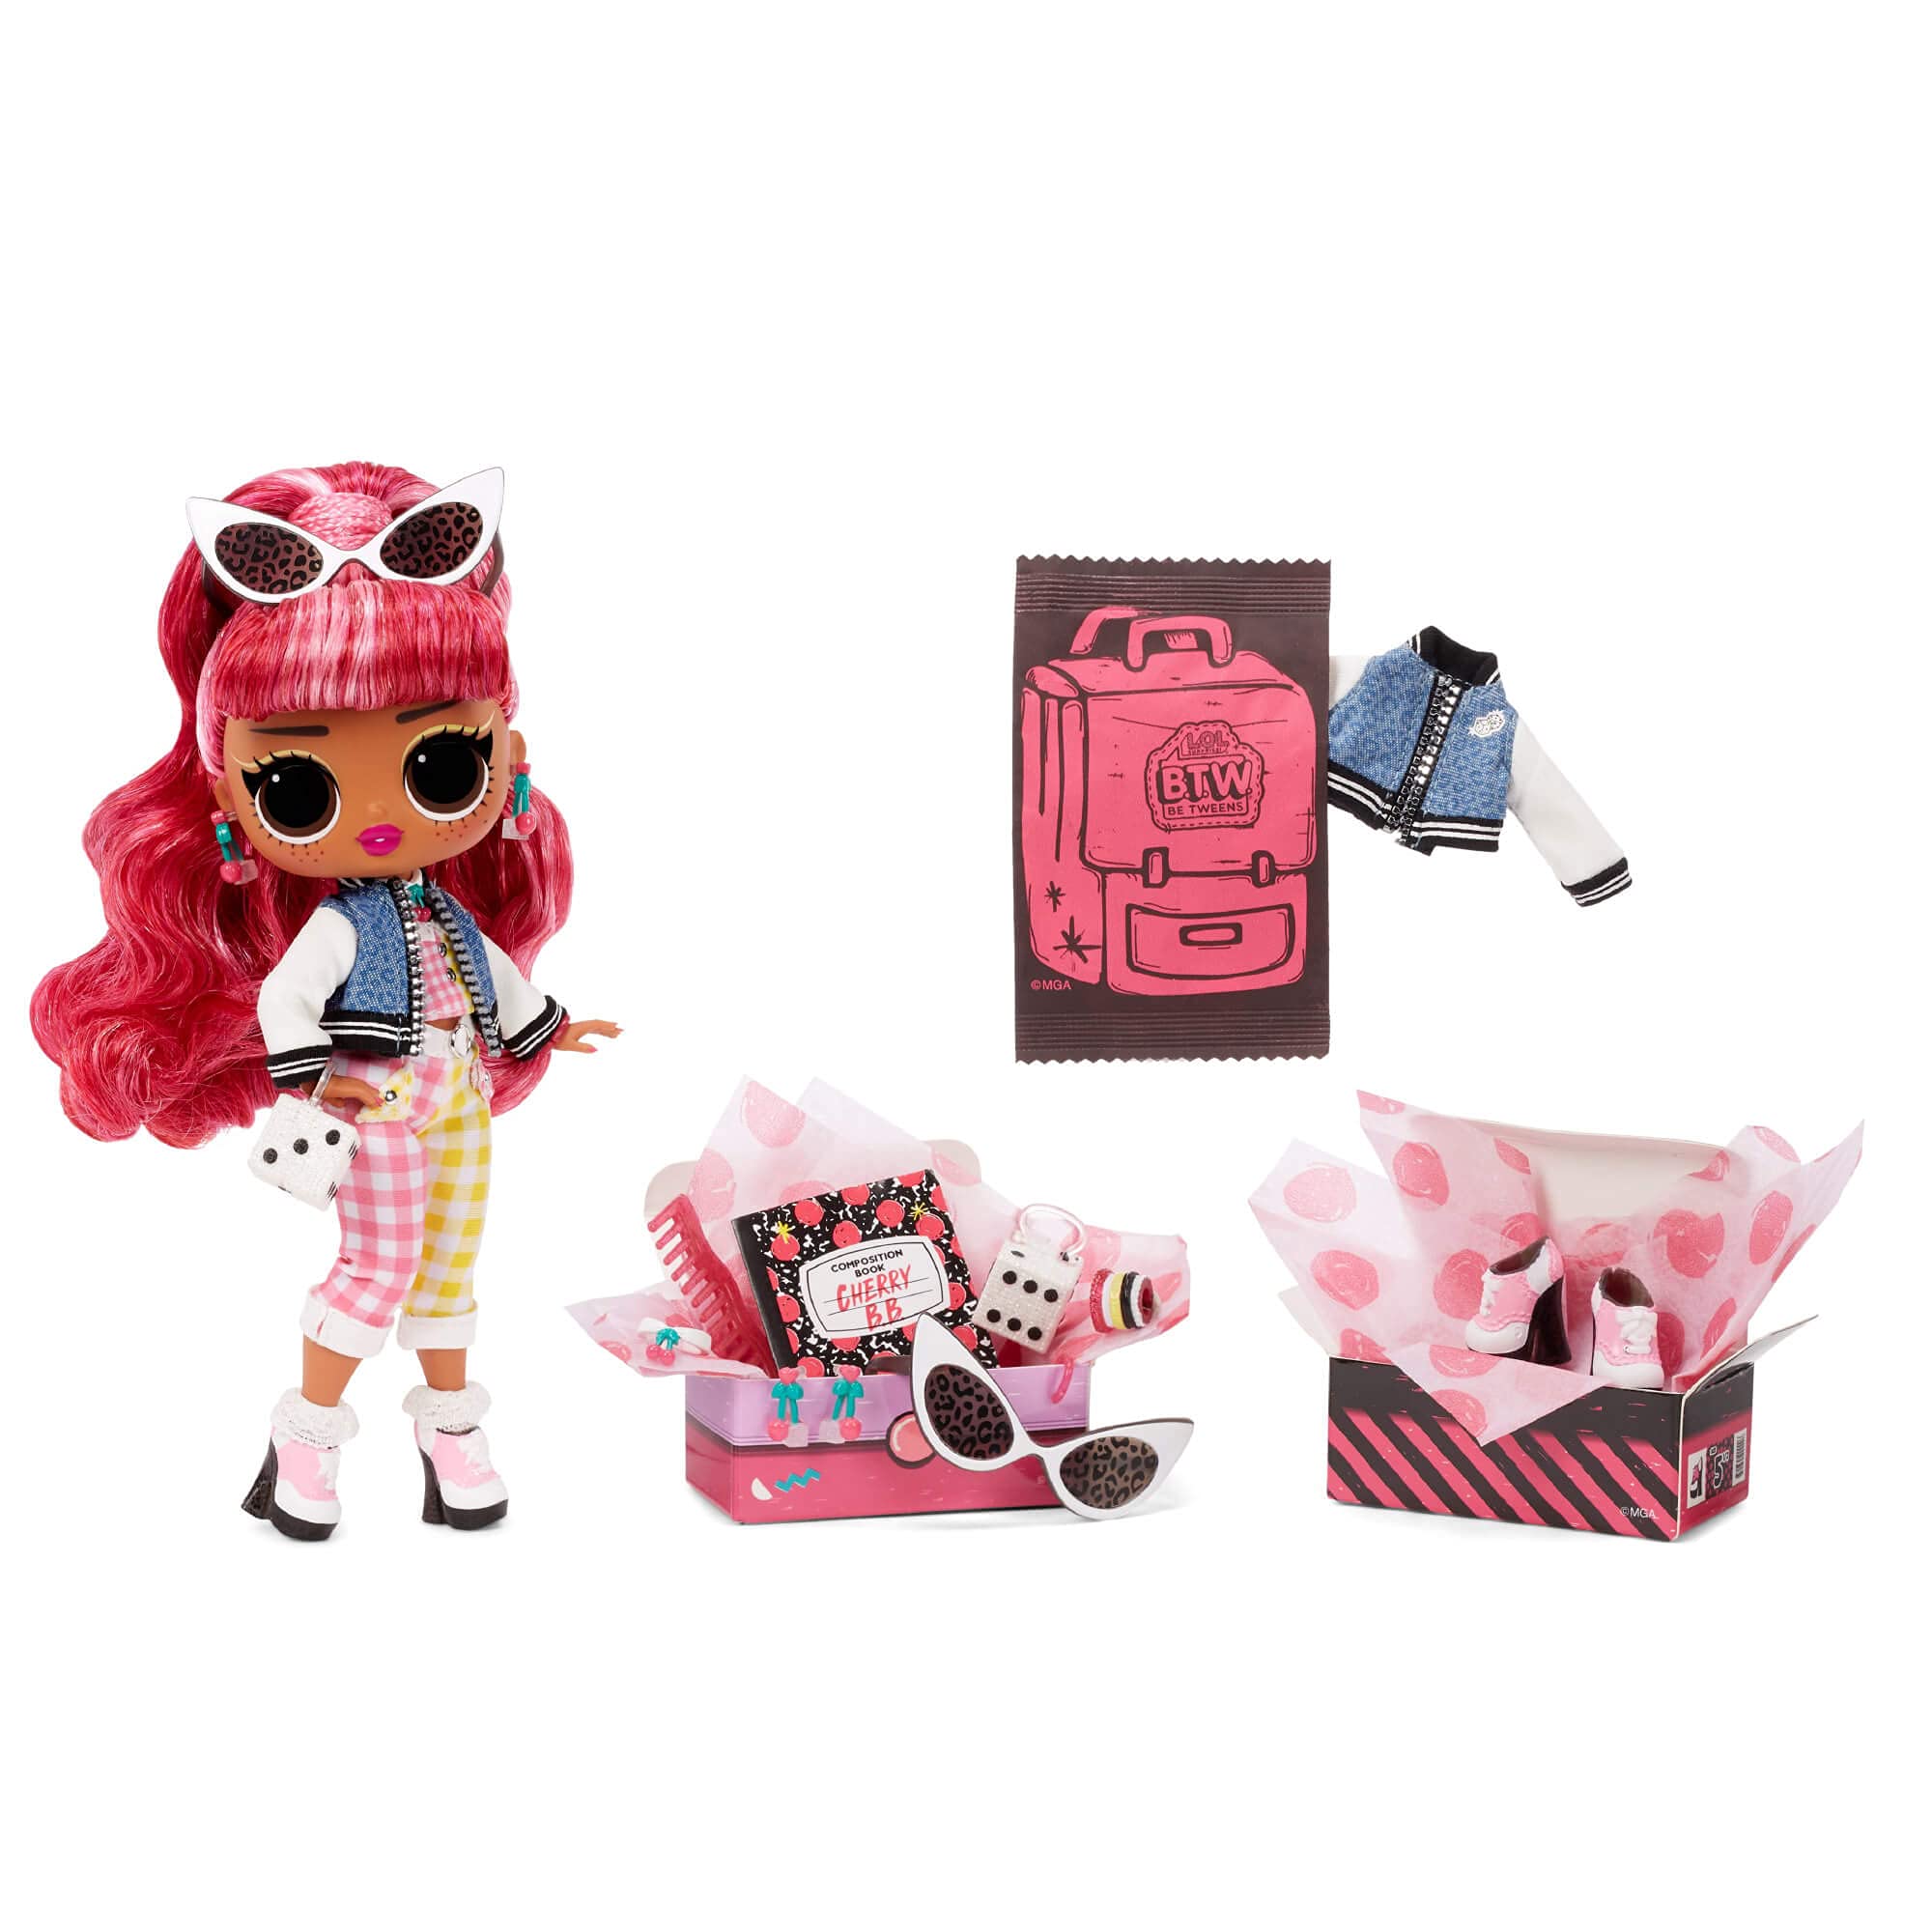 LOL Surprise Tweens Cherry BB Fashion Doll with 15 Surprises, Pink Hair, Including Stylish Outfit and Accessories with Reusable Bedroom Playset - Gift for Kids, Toys for Girls Boys Ages 4 5 6 7+ Years